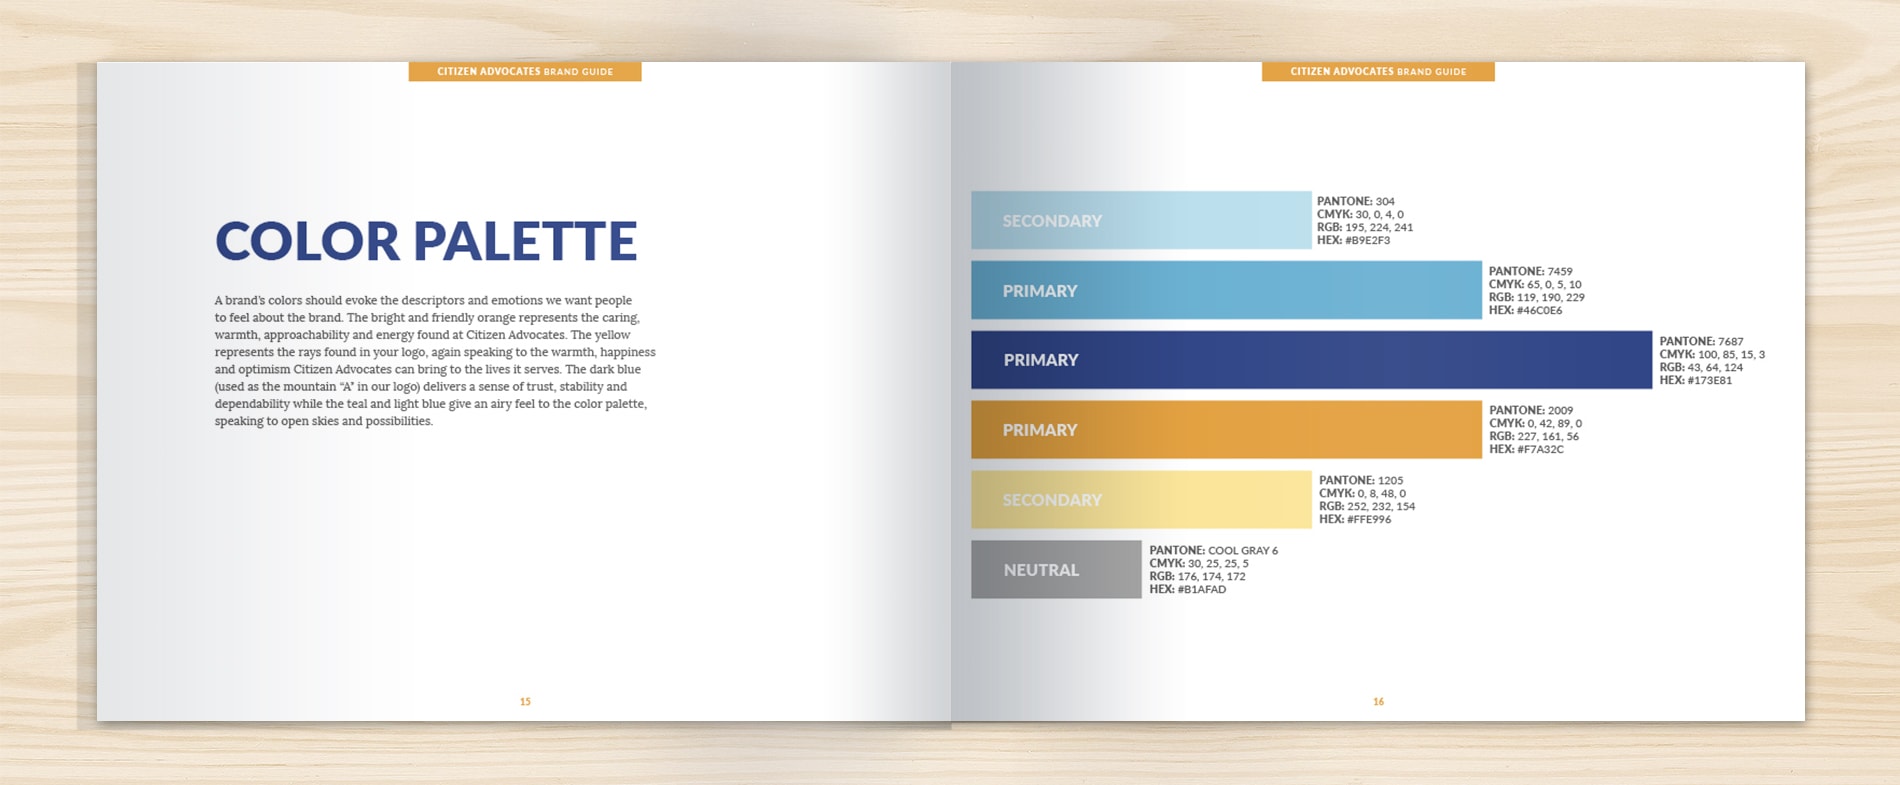 Brand identity book design for mental healthcare services client